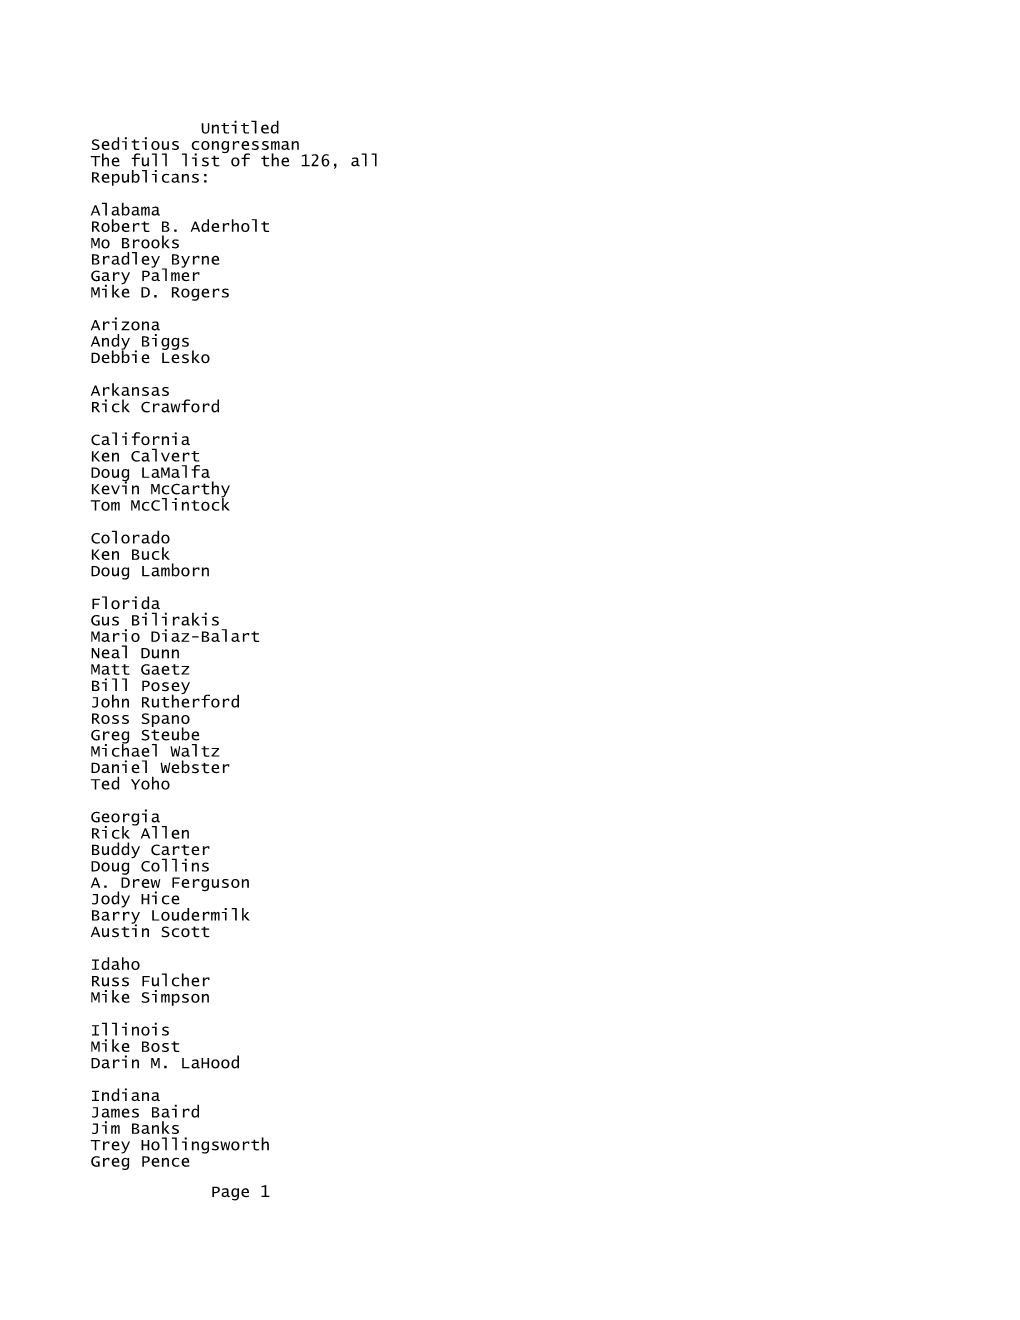 This Is a Pdf List of the Names